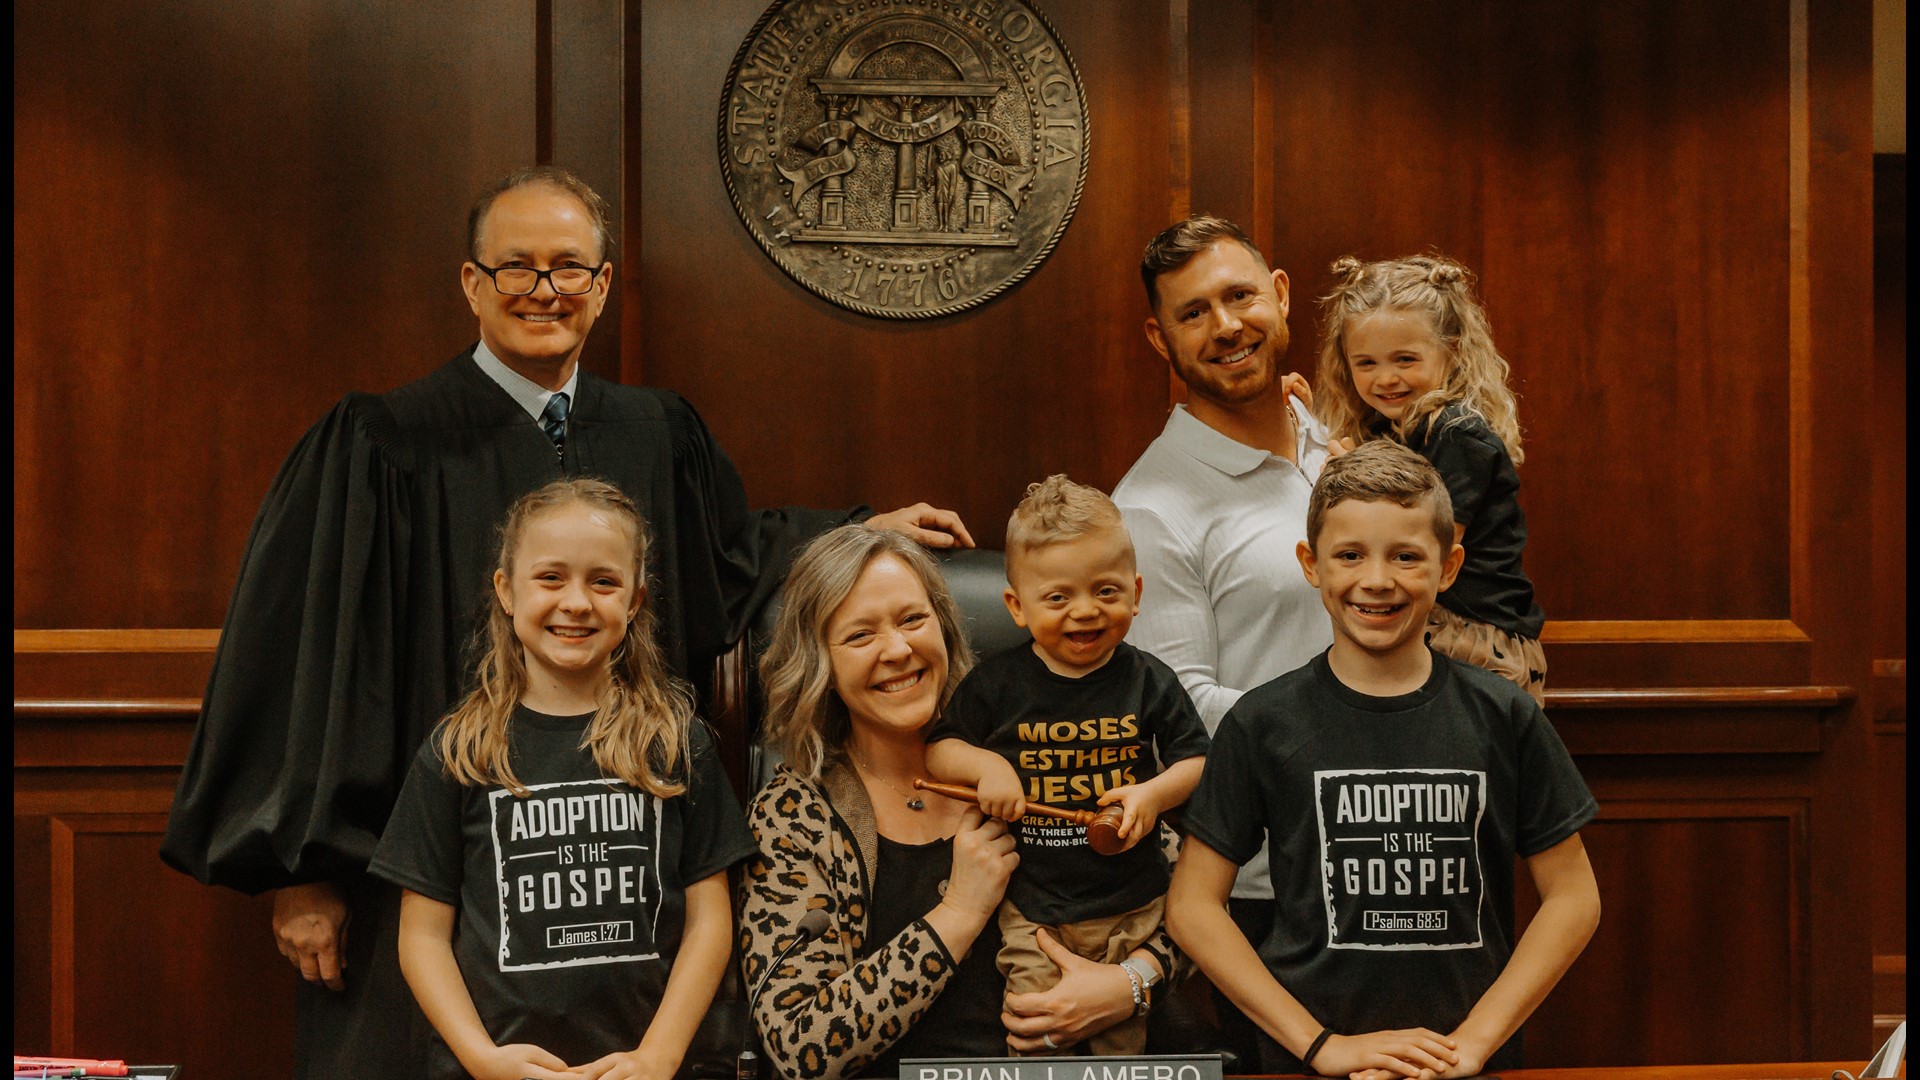 May is National Foster Care Month and the Suiter family is advocating for the shortage of foster parents in the state.